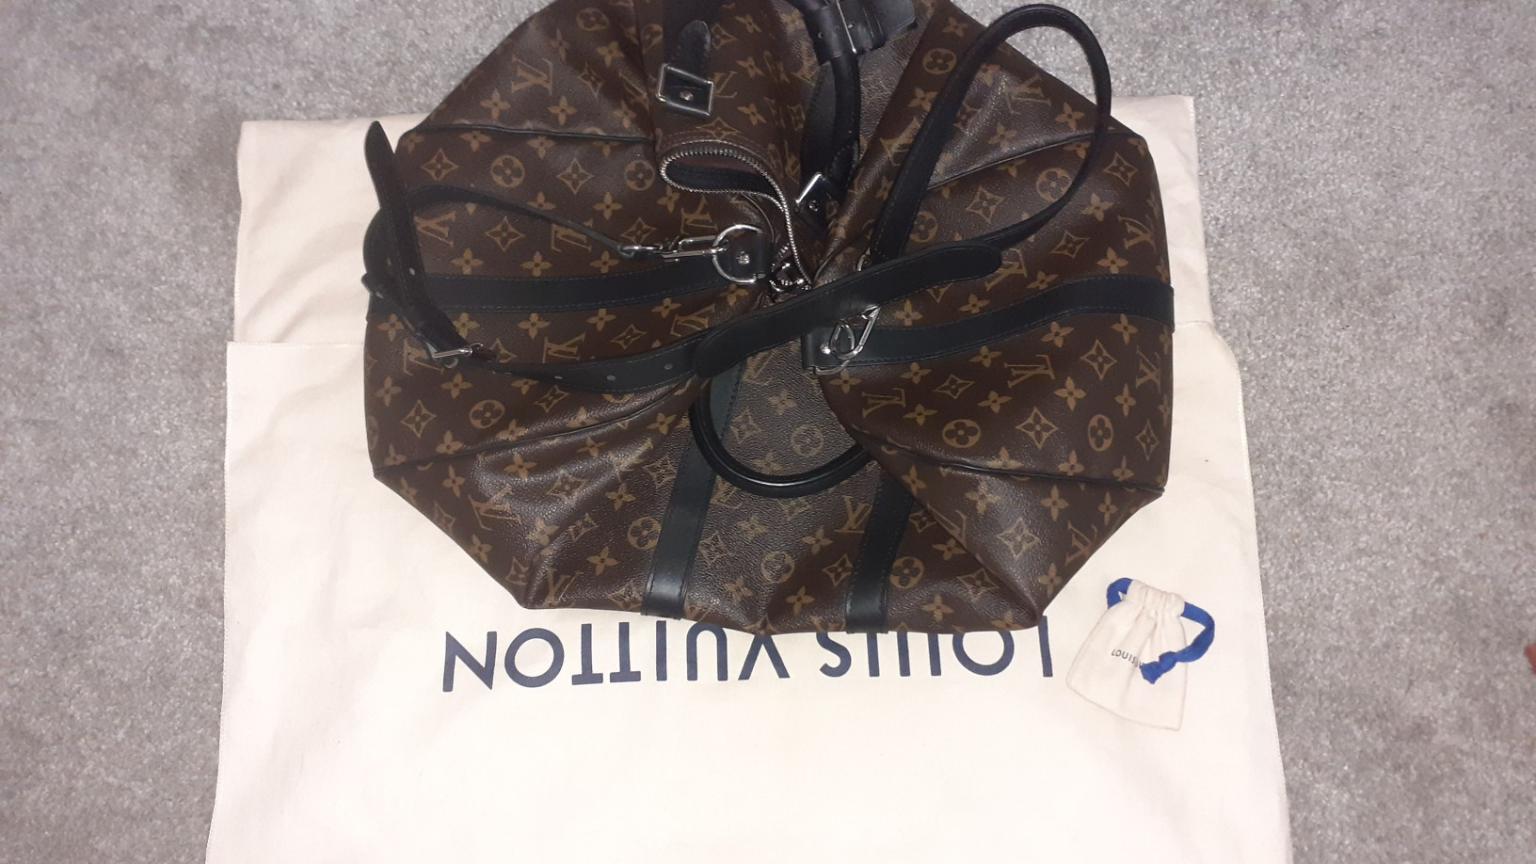 louis Vuitton bag in WS10 Walsall for £1,100.00 for sale | Shpock